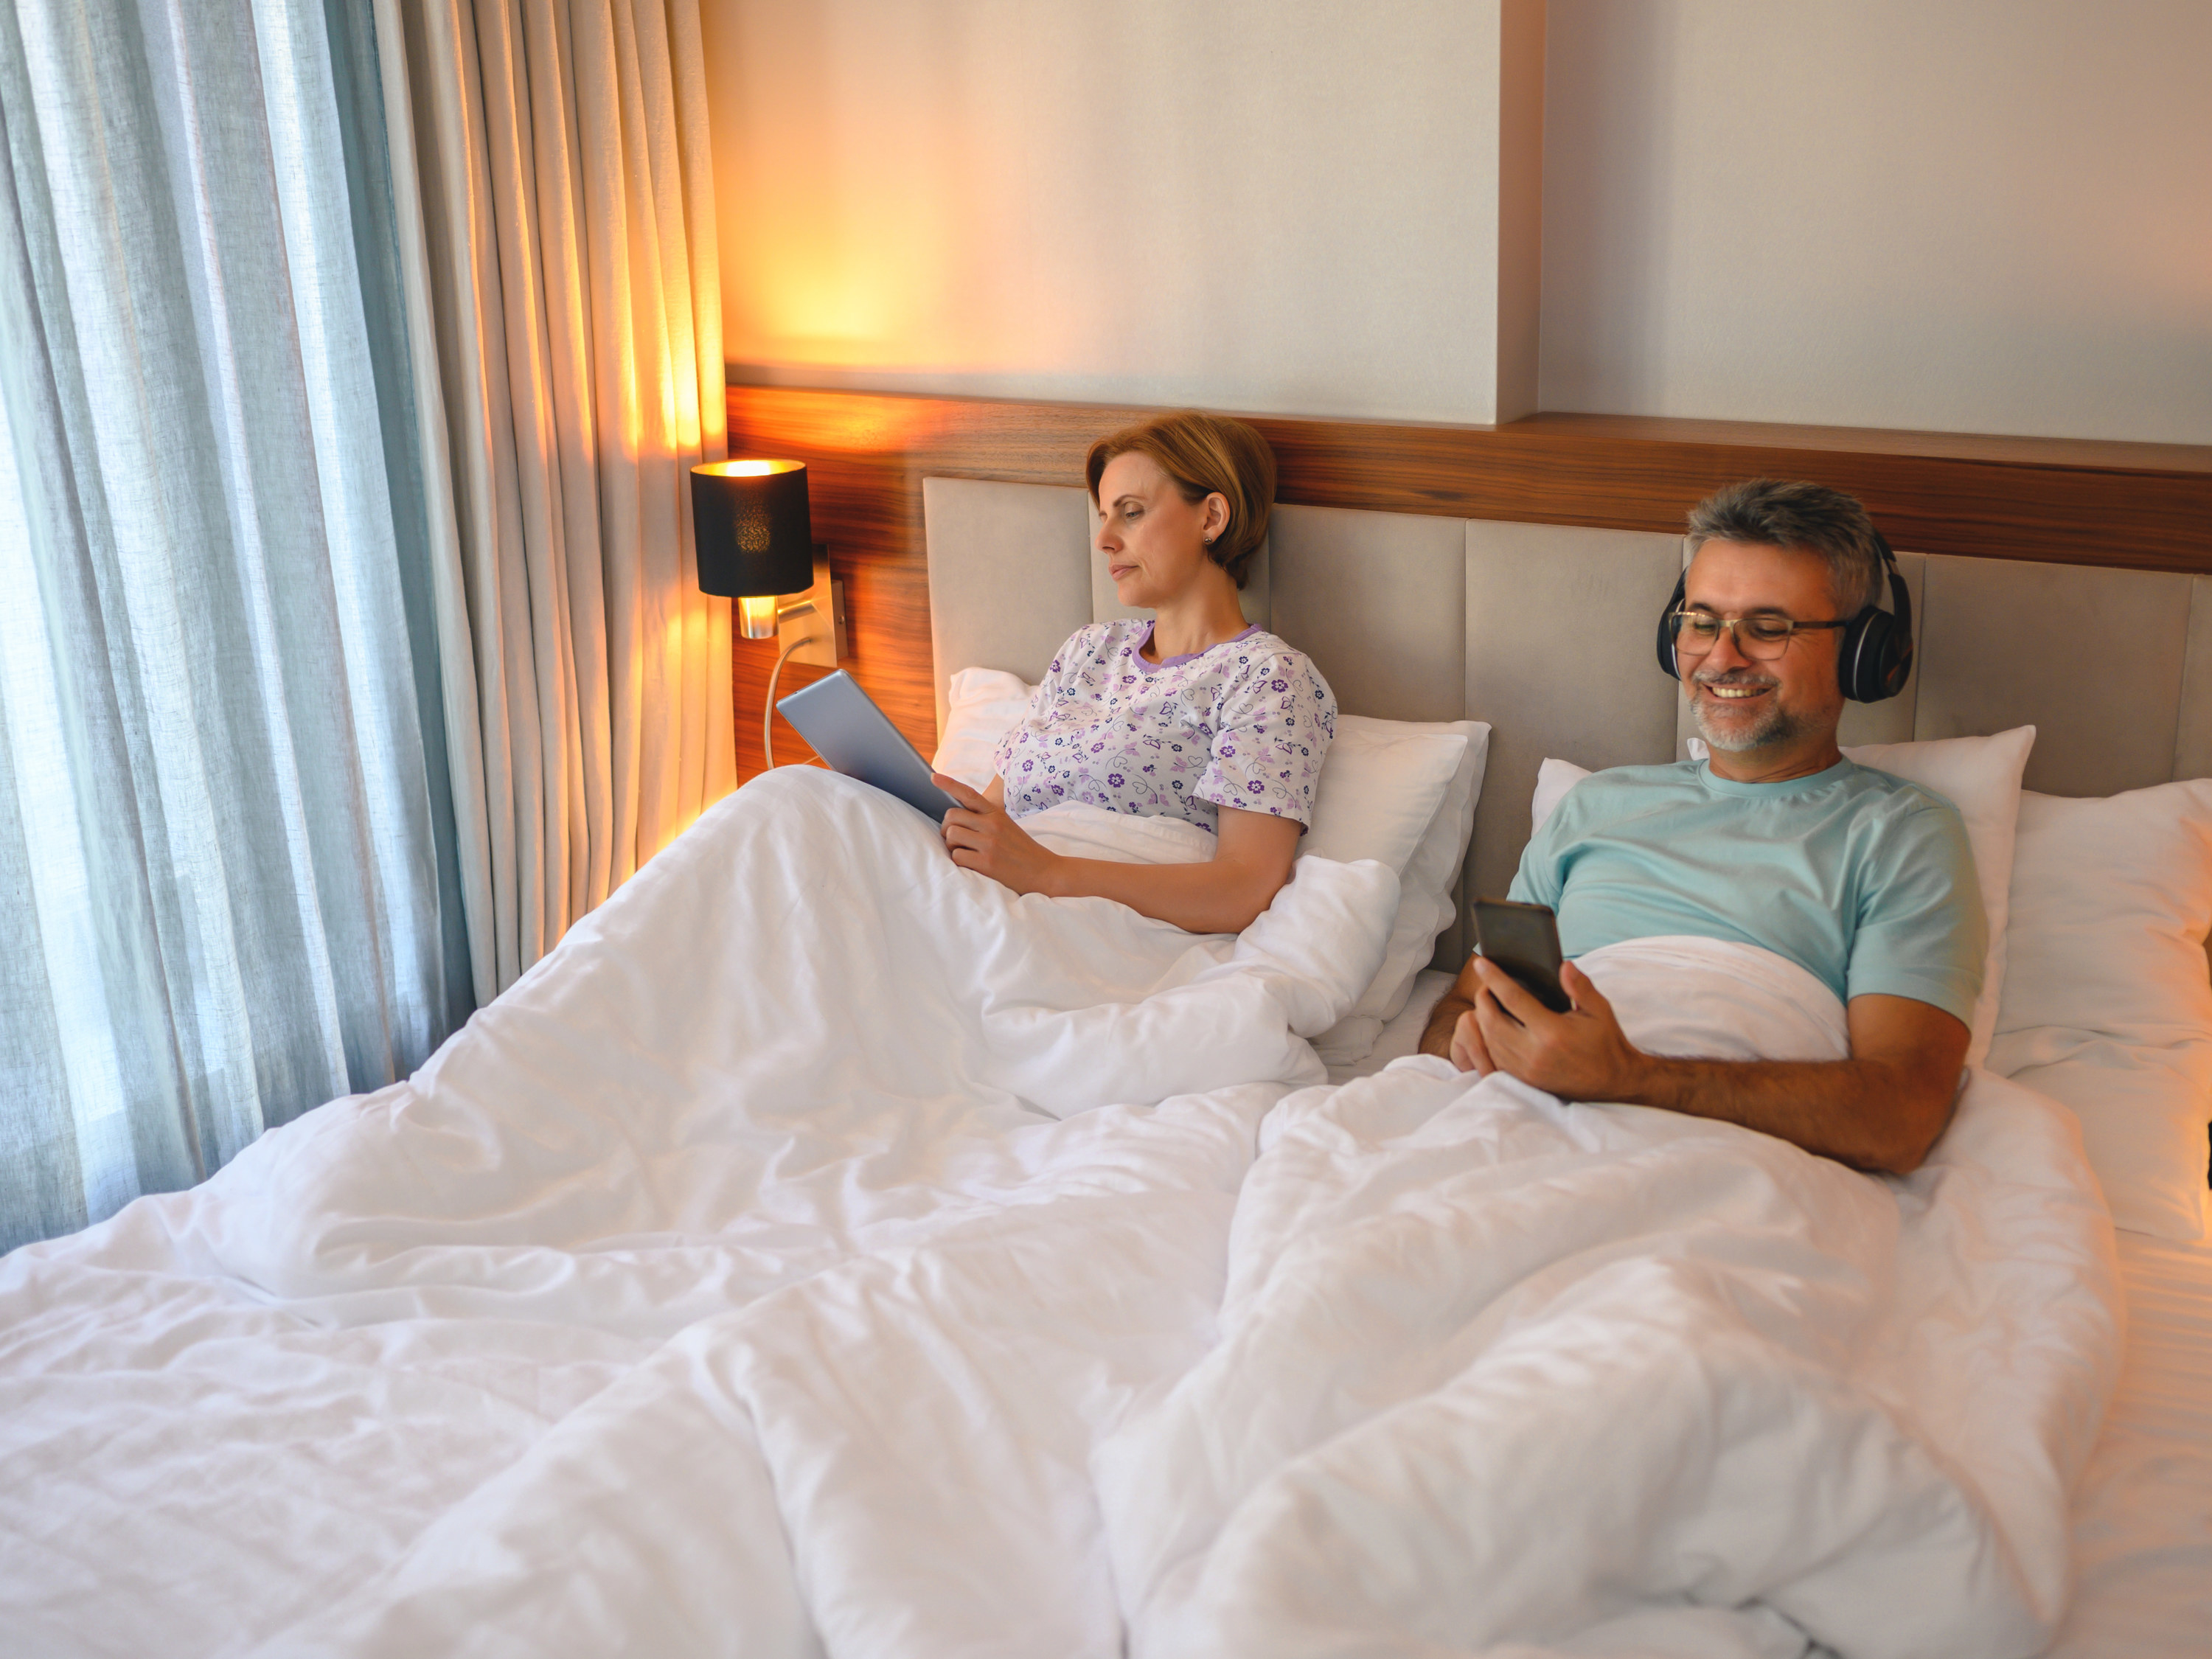 Couple lying in bed using mobile phone and tablet while ignoring each other